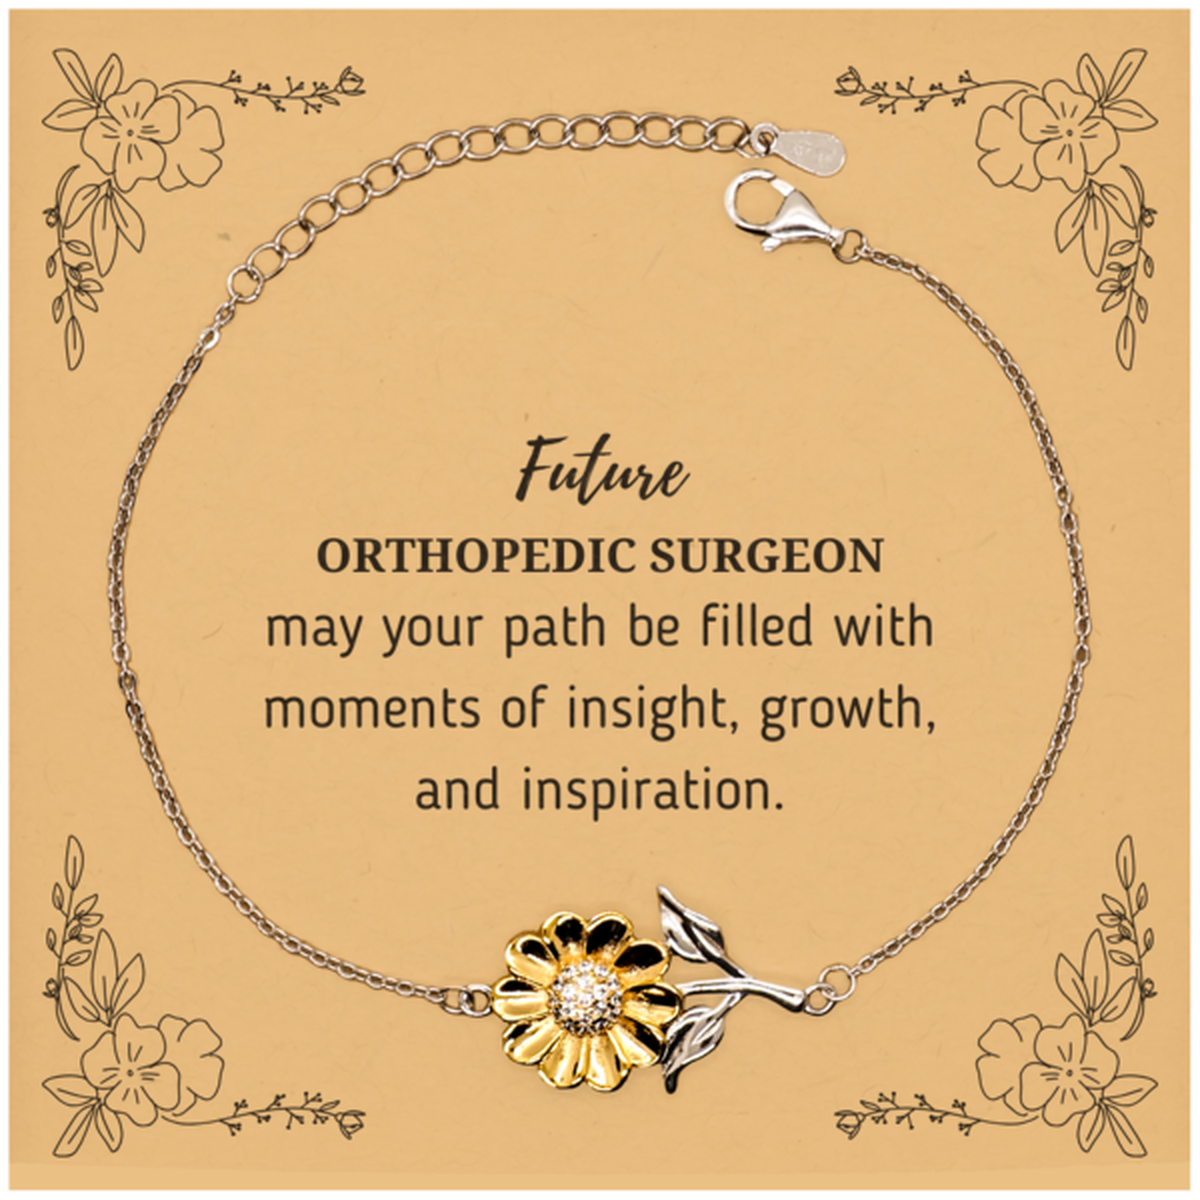 Future Orthopedic Surgeon Gifts, May your path be filled with moments of insight, Graduation Gifts for New Orthopedic Surgeon, Christmas Unique Sunflower Bracelet For Men, Women, Friends